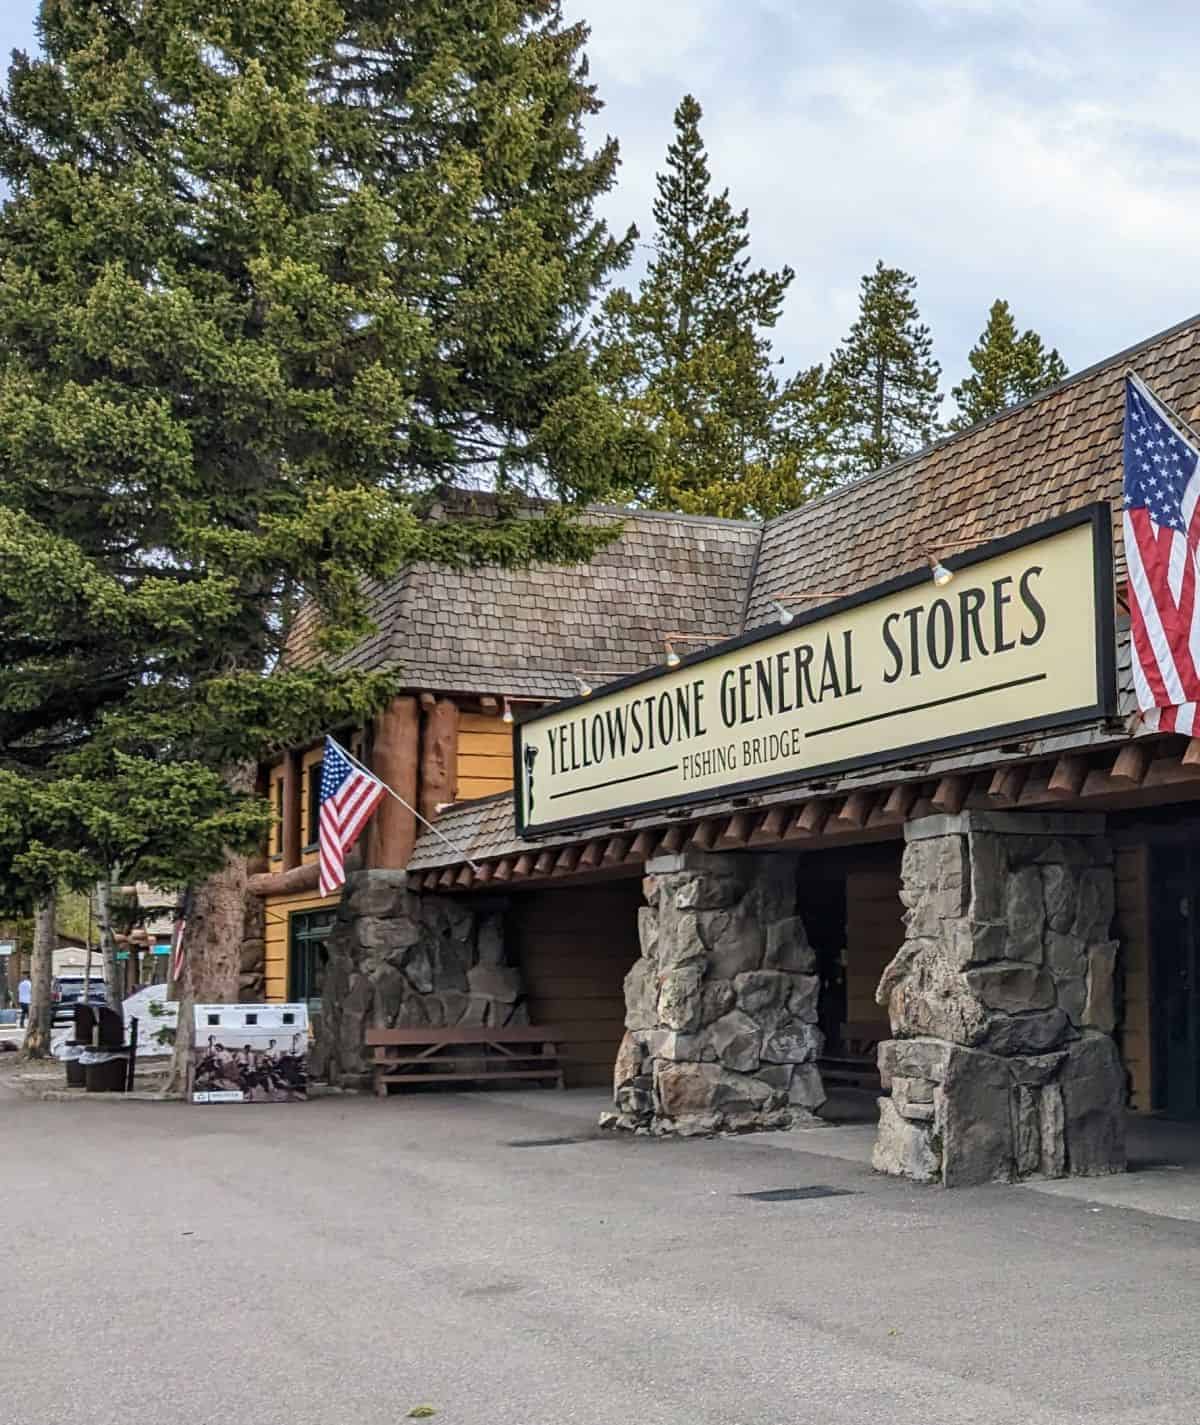 Stone and wood building with a sign that says Yellowstone General Stores Fishing Bridge.